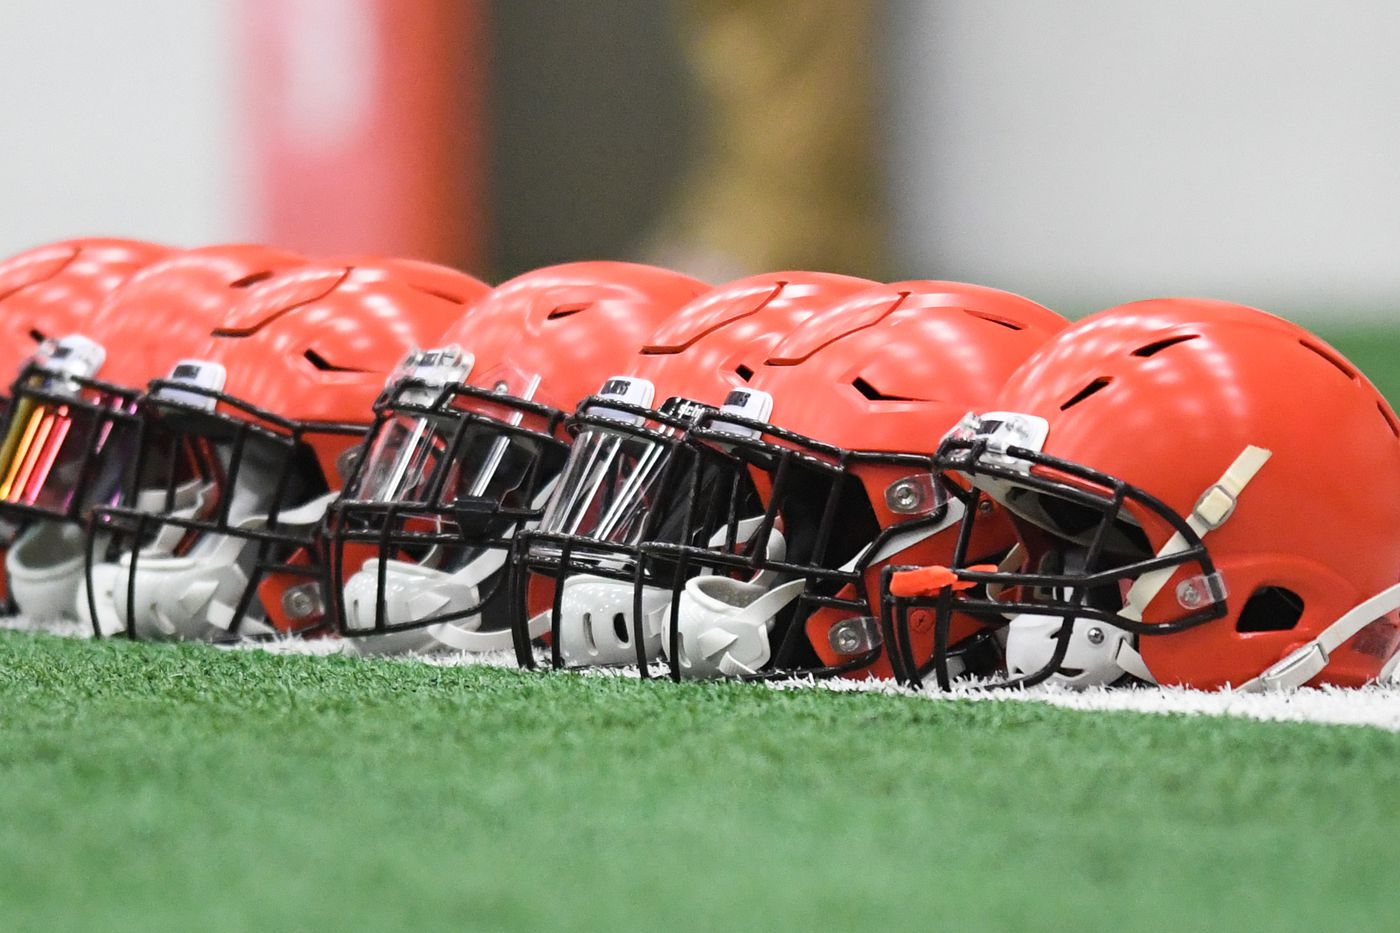 Cleveland Browns plan to keep current helmet design By Nature